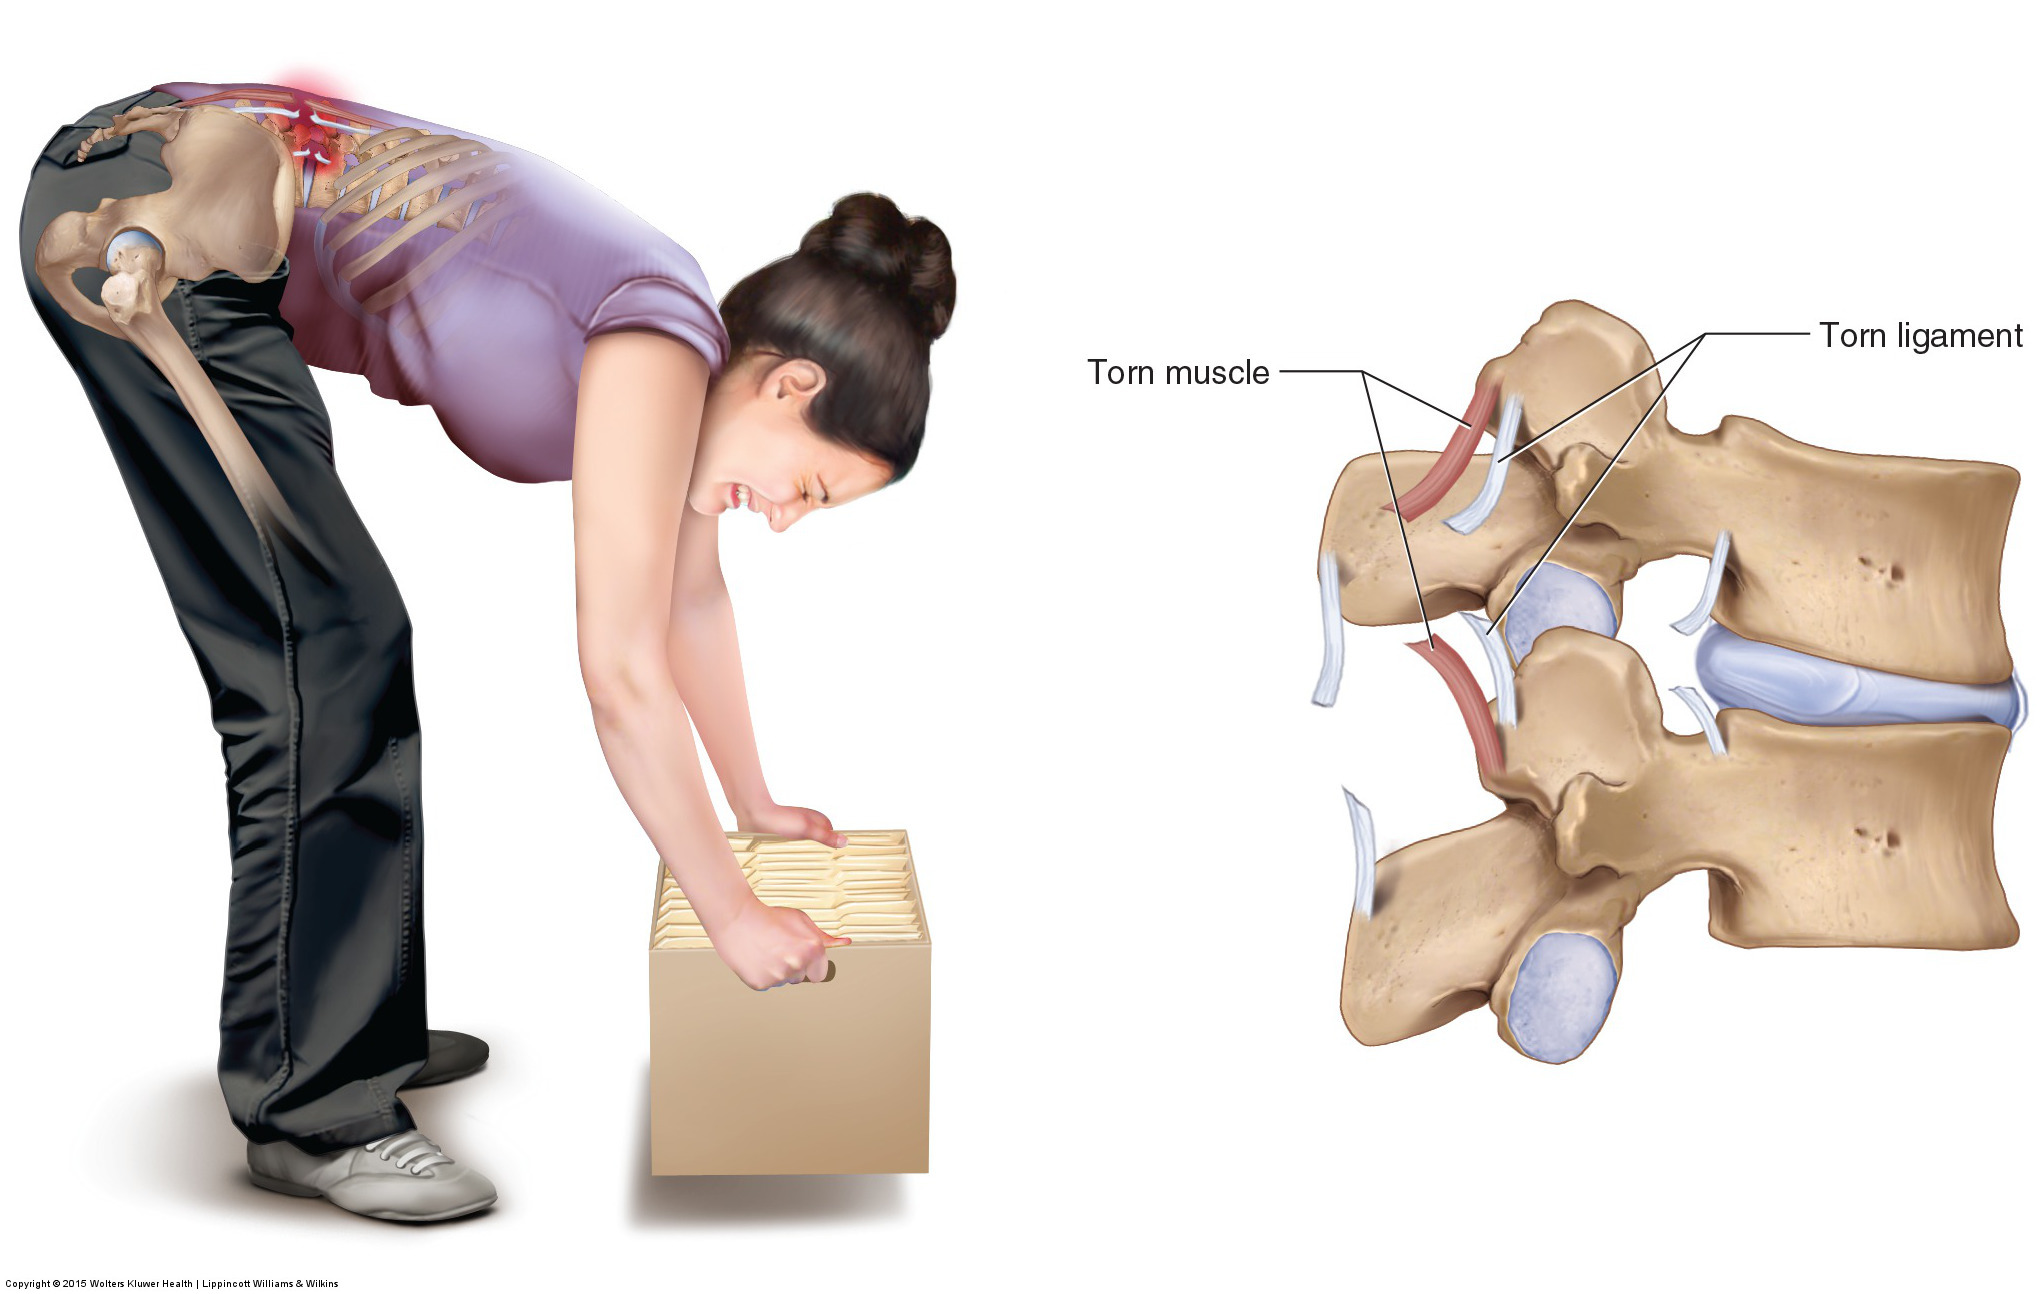 Bending forward to pick up an object is a common cause of low back strains and sprains. Permission: Joseph E. Muscolino. Manual Therapy for the Low Back and Pelvis (2015).